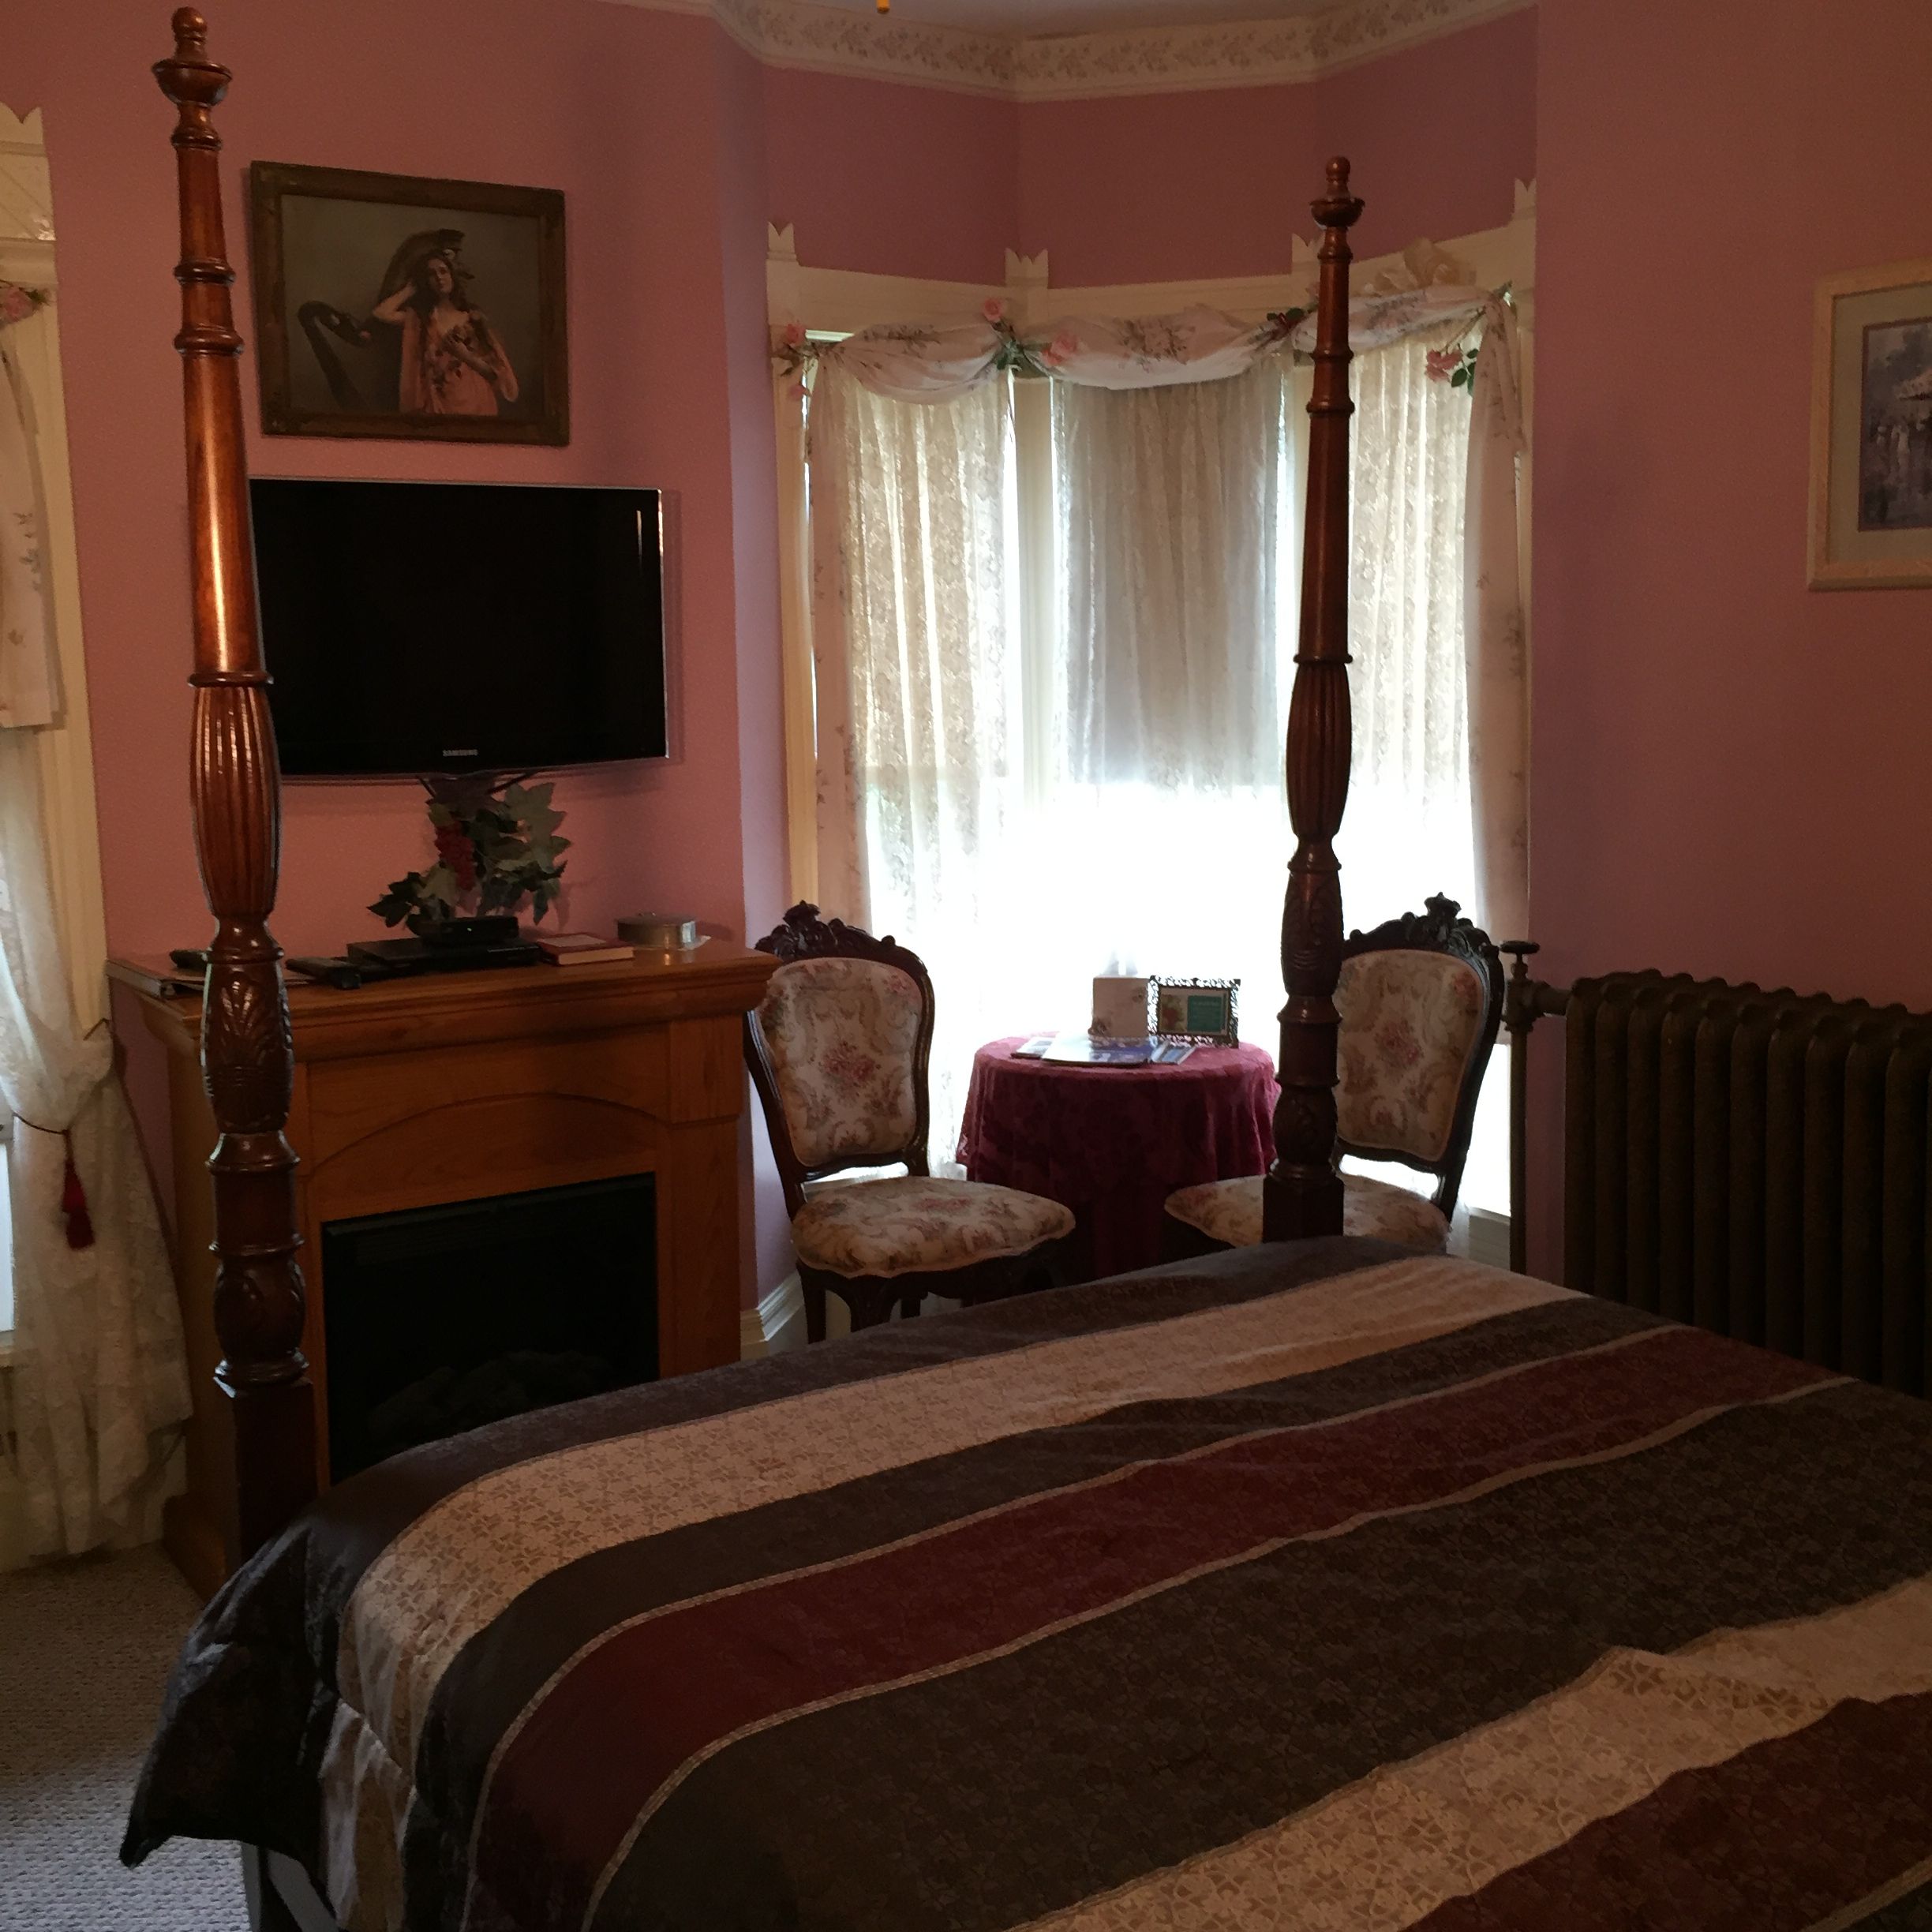 Places To Stay in Galena, Illinois